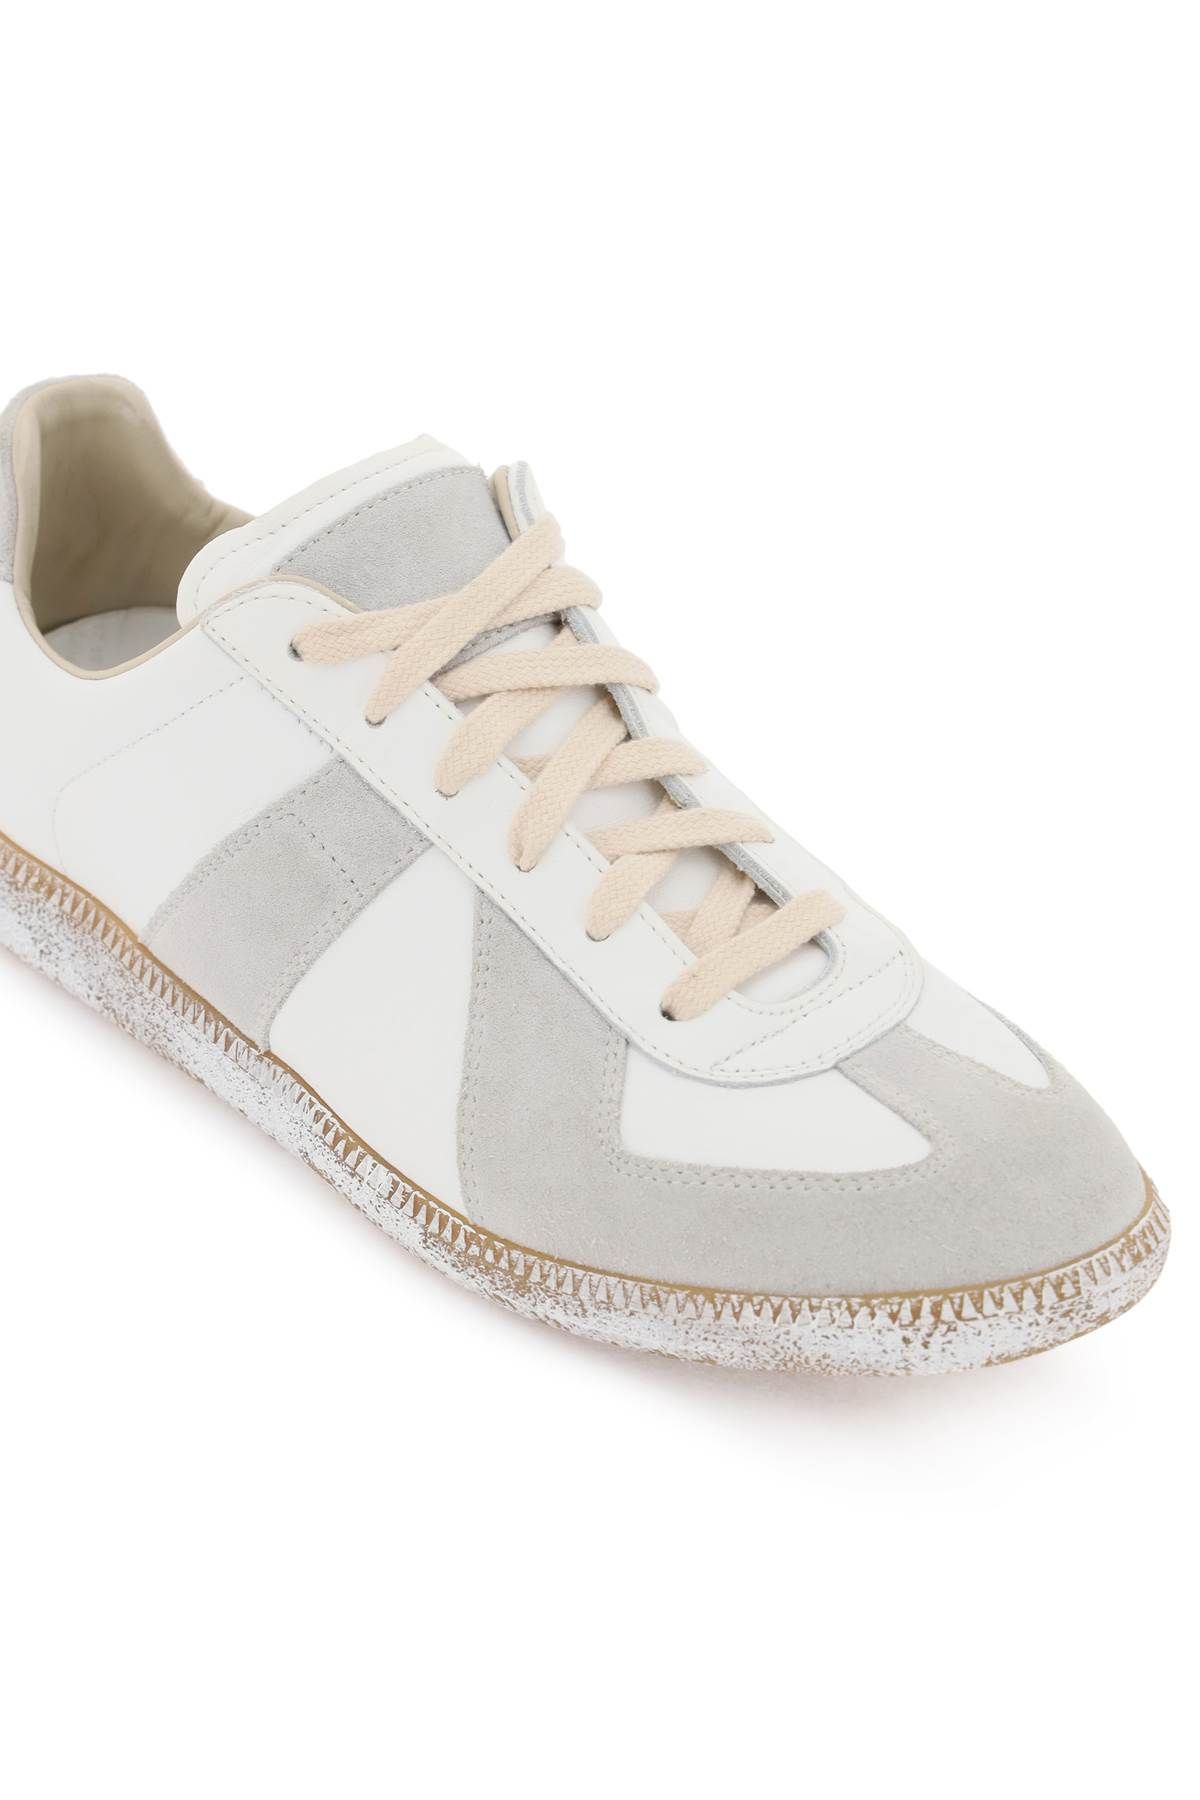 Shop Maison Margiela Vintage Nappa And Suede Replica Sneakers In In White,grey